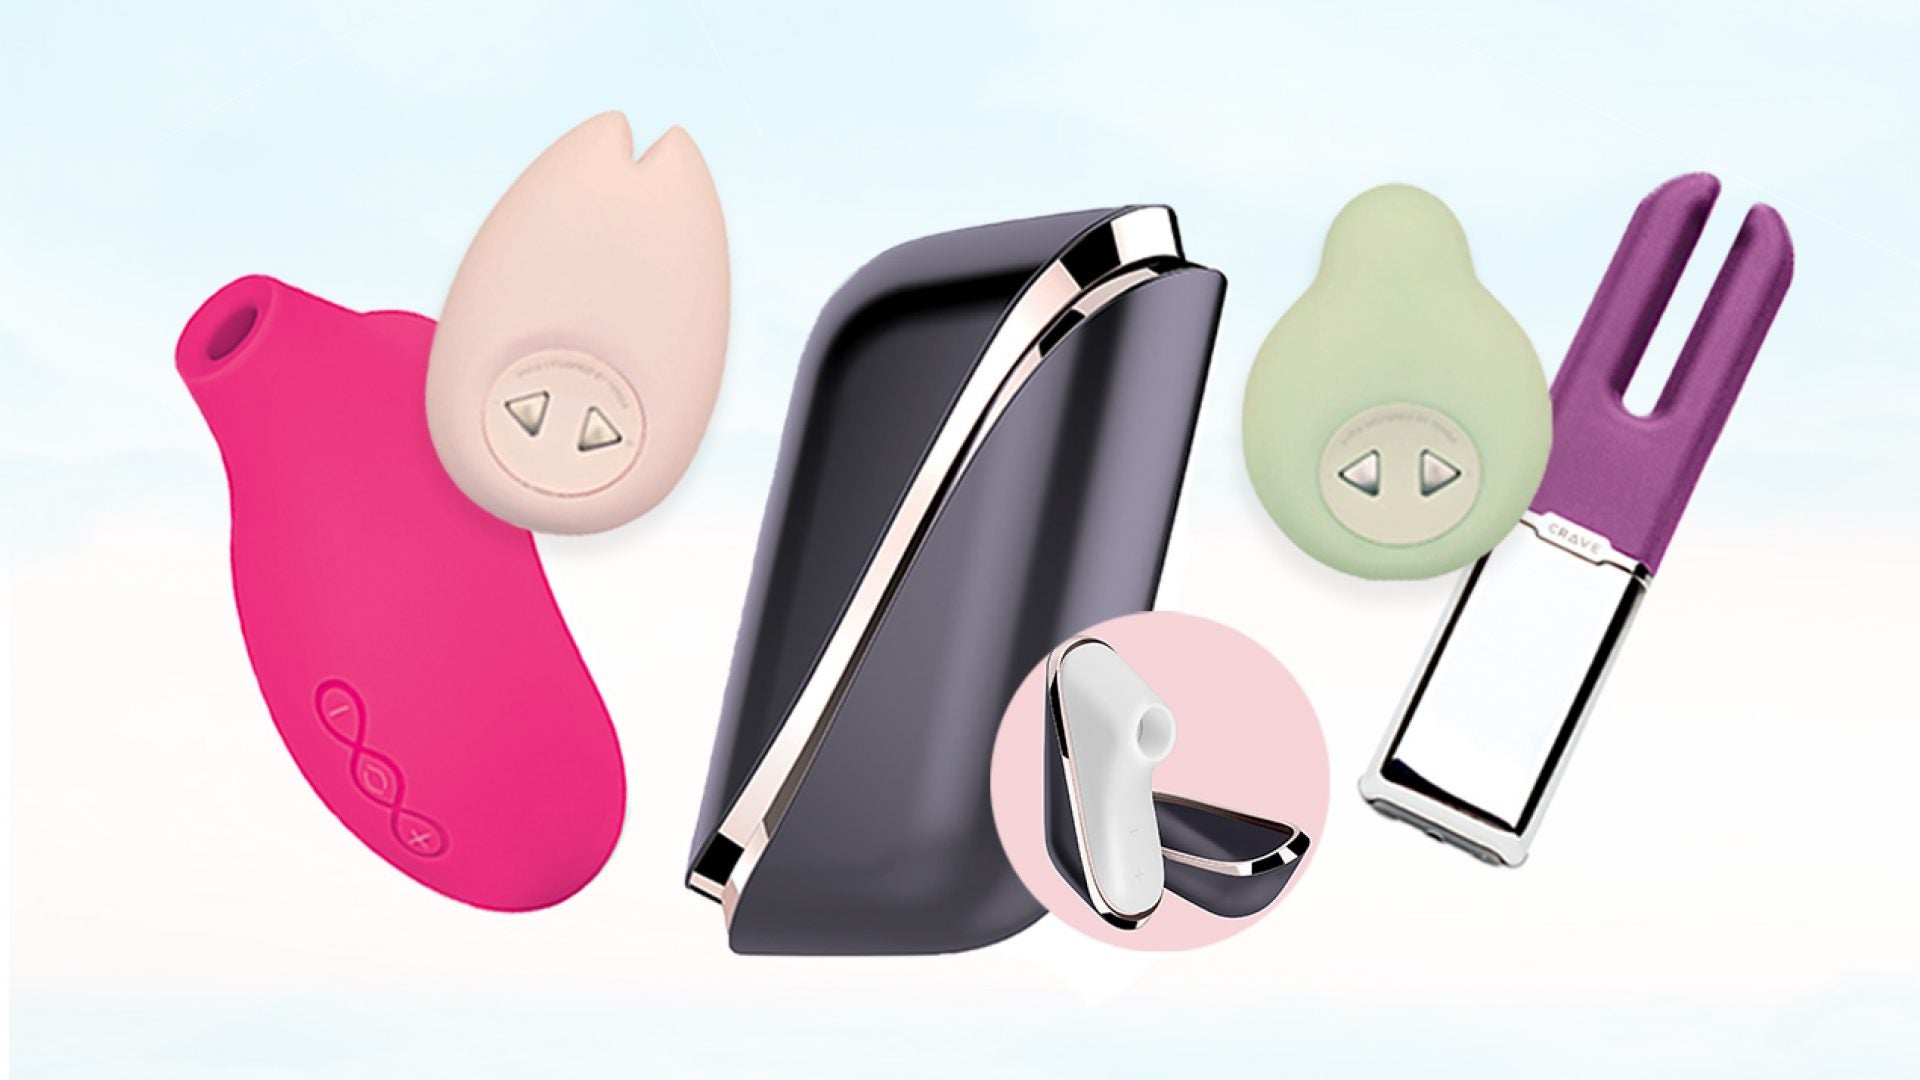 Women Swear By These Luxurious And Ahh-mazing Vibrators